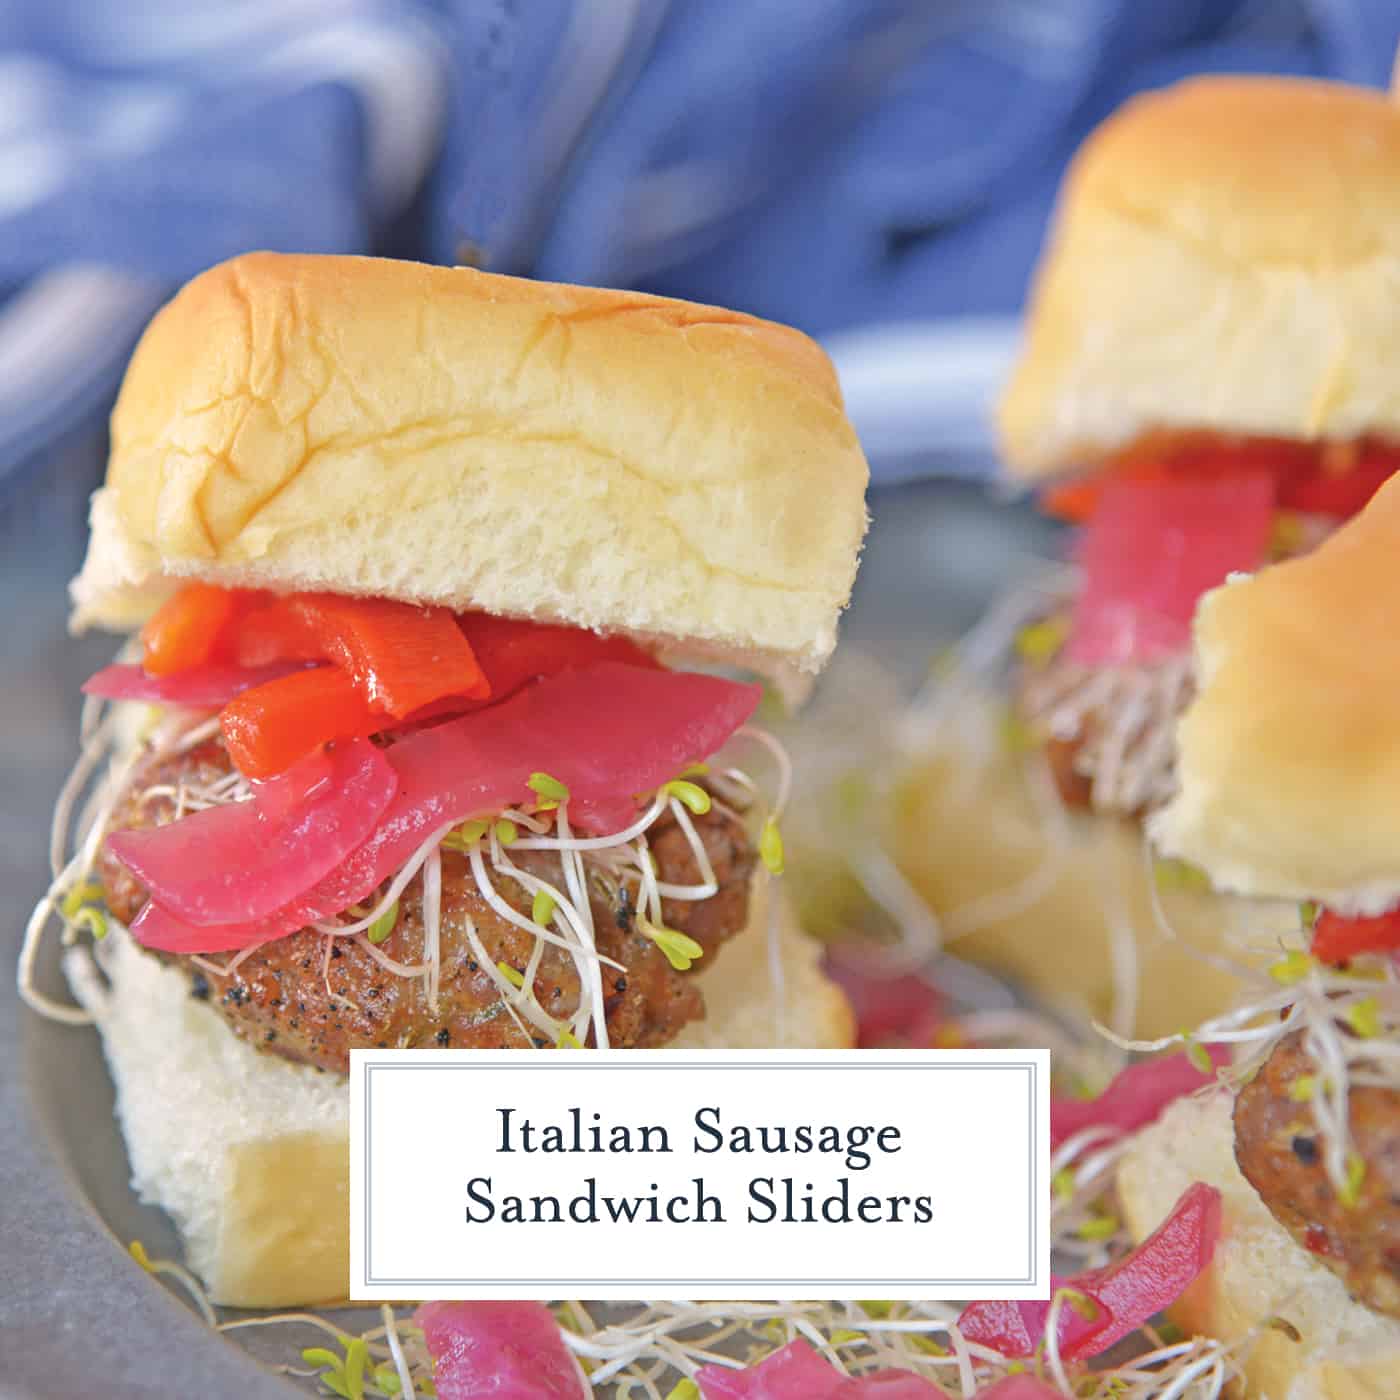 These Italian Sausage Sandwich Sliders are easy to prepare and even easier to eat. Featuring pork sausage and Hawaiian rolls, they are sure to impress.